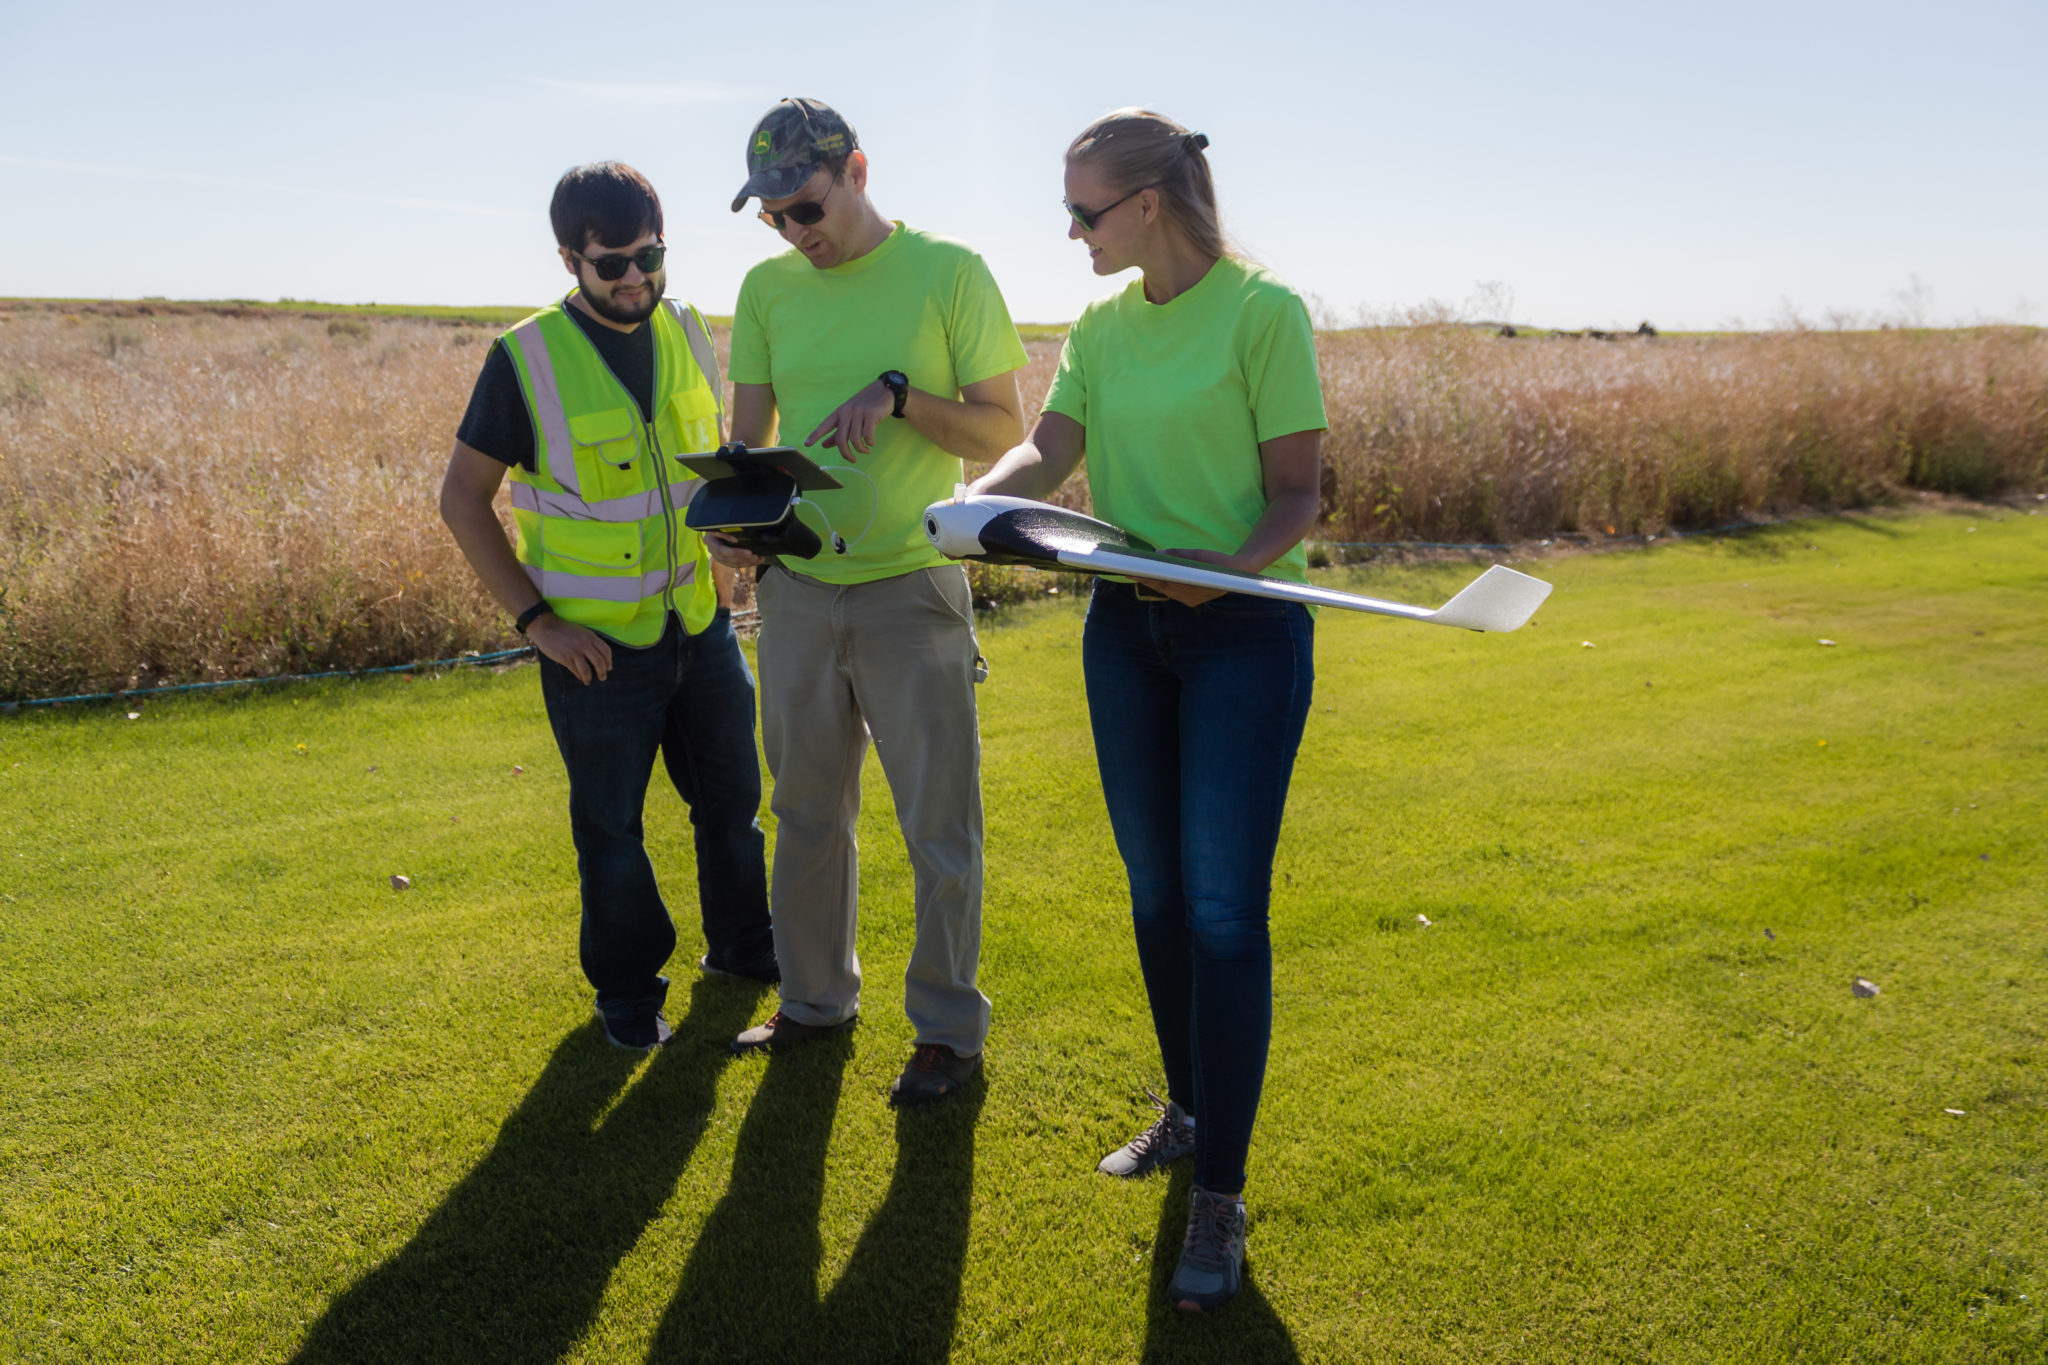 Instructor and students holding drones